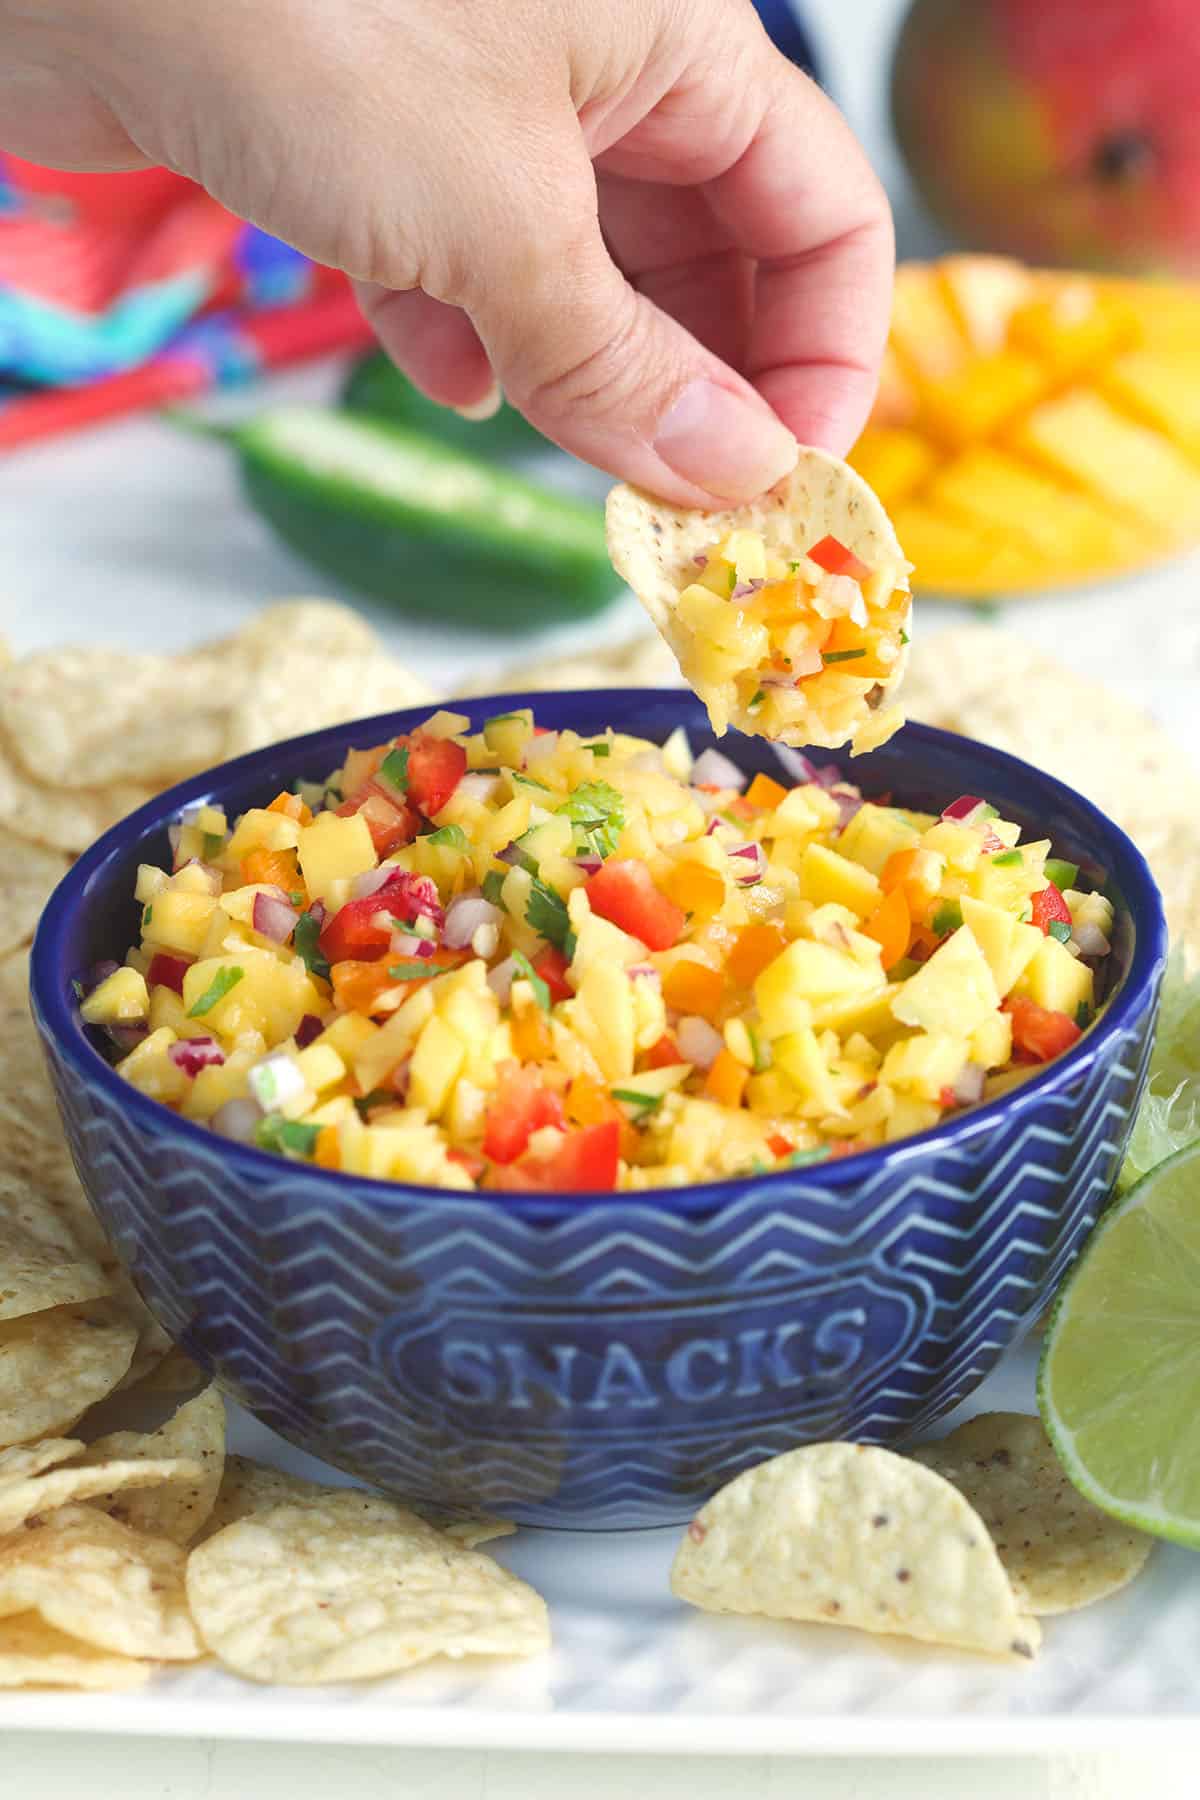 A chip is scooping up some mango salsa out of a blue serving bowl.